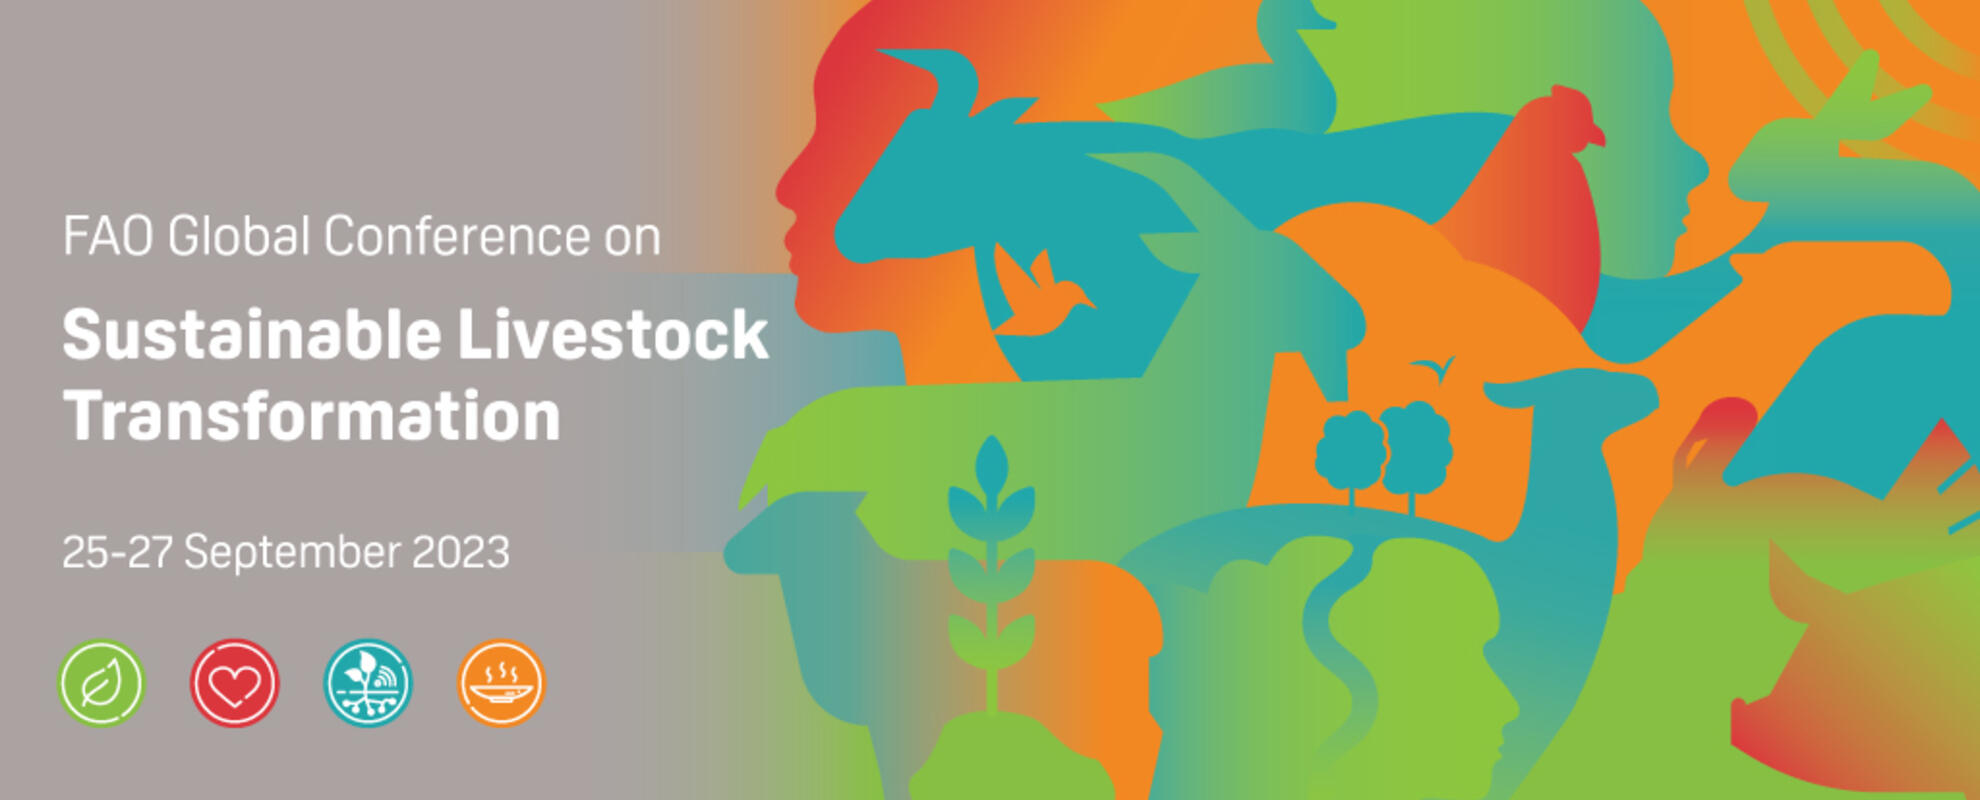 FAO Global Conference on Sustainable Livestock Transformation 